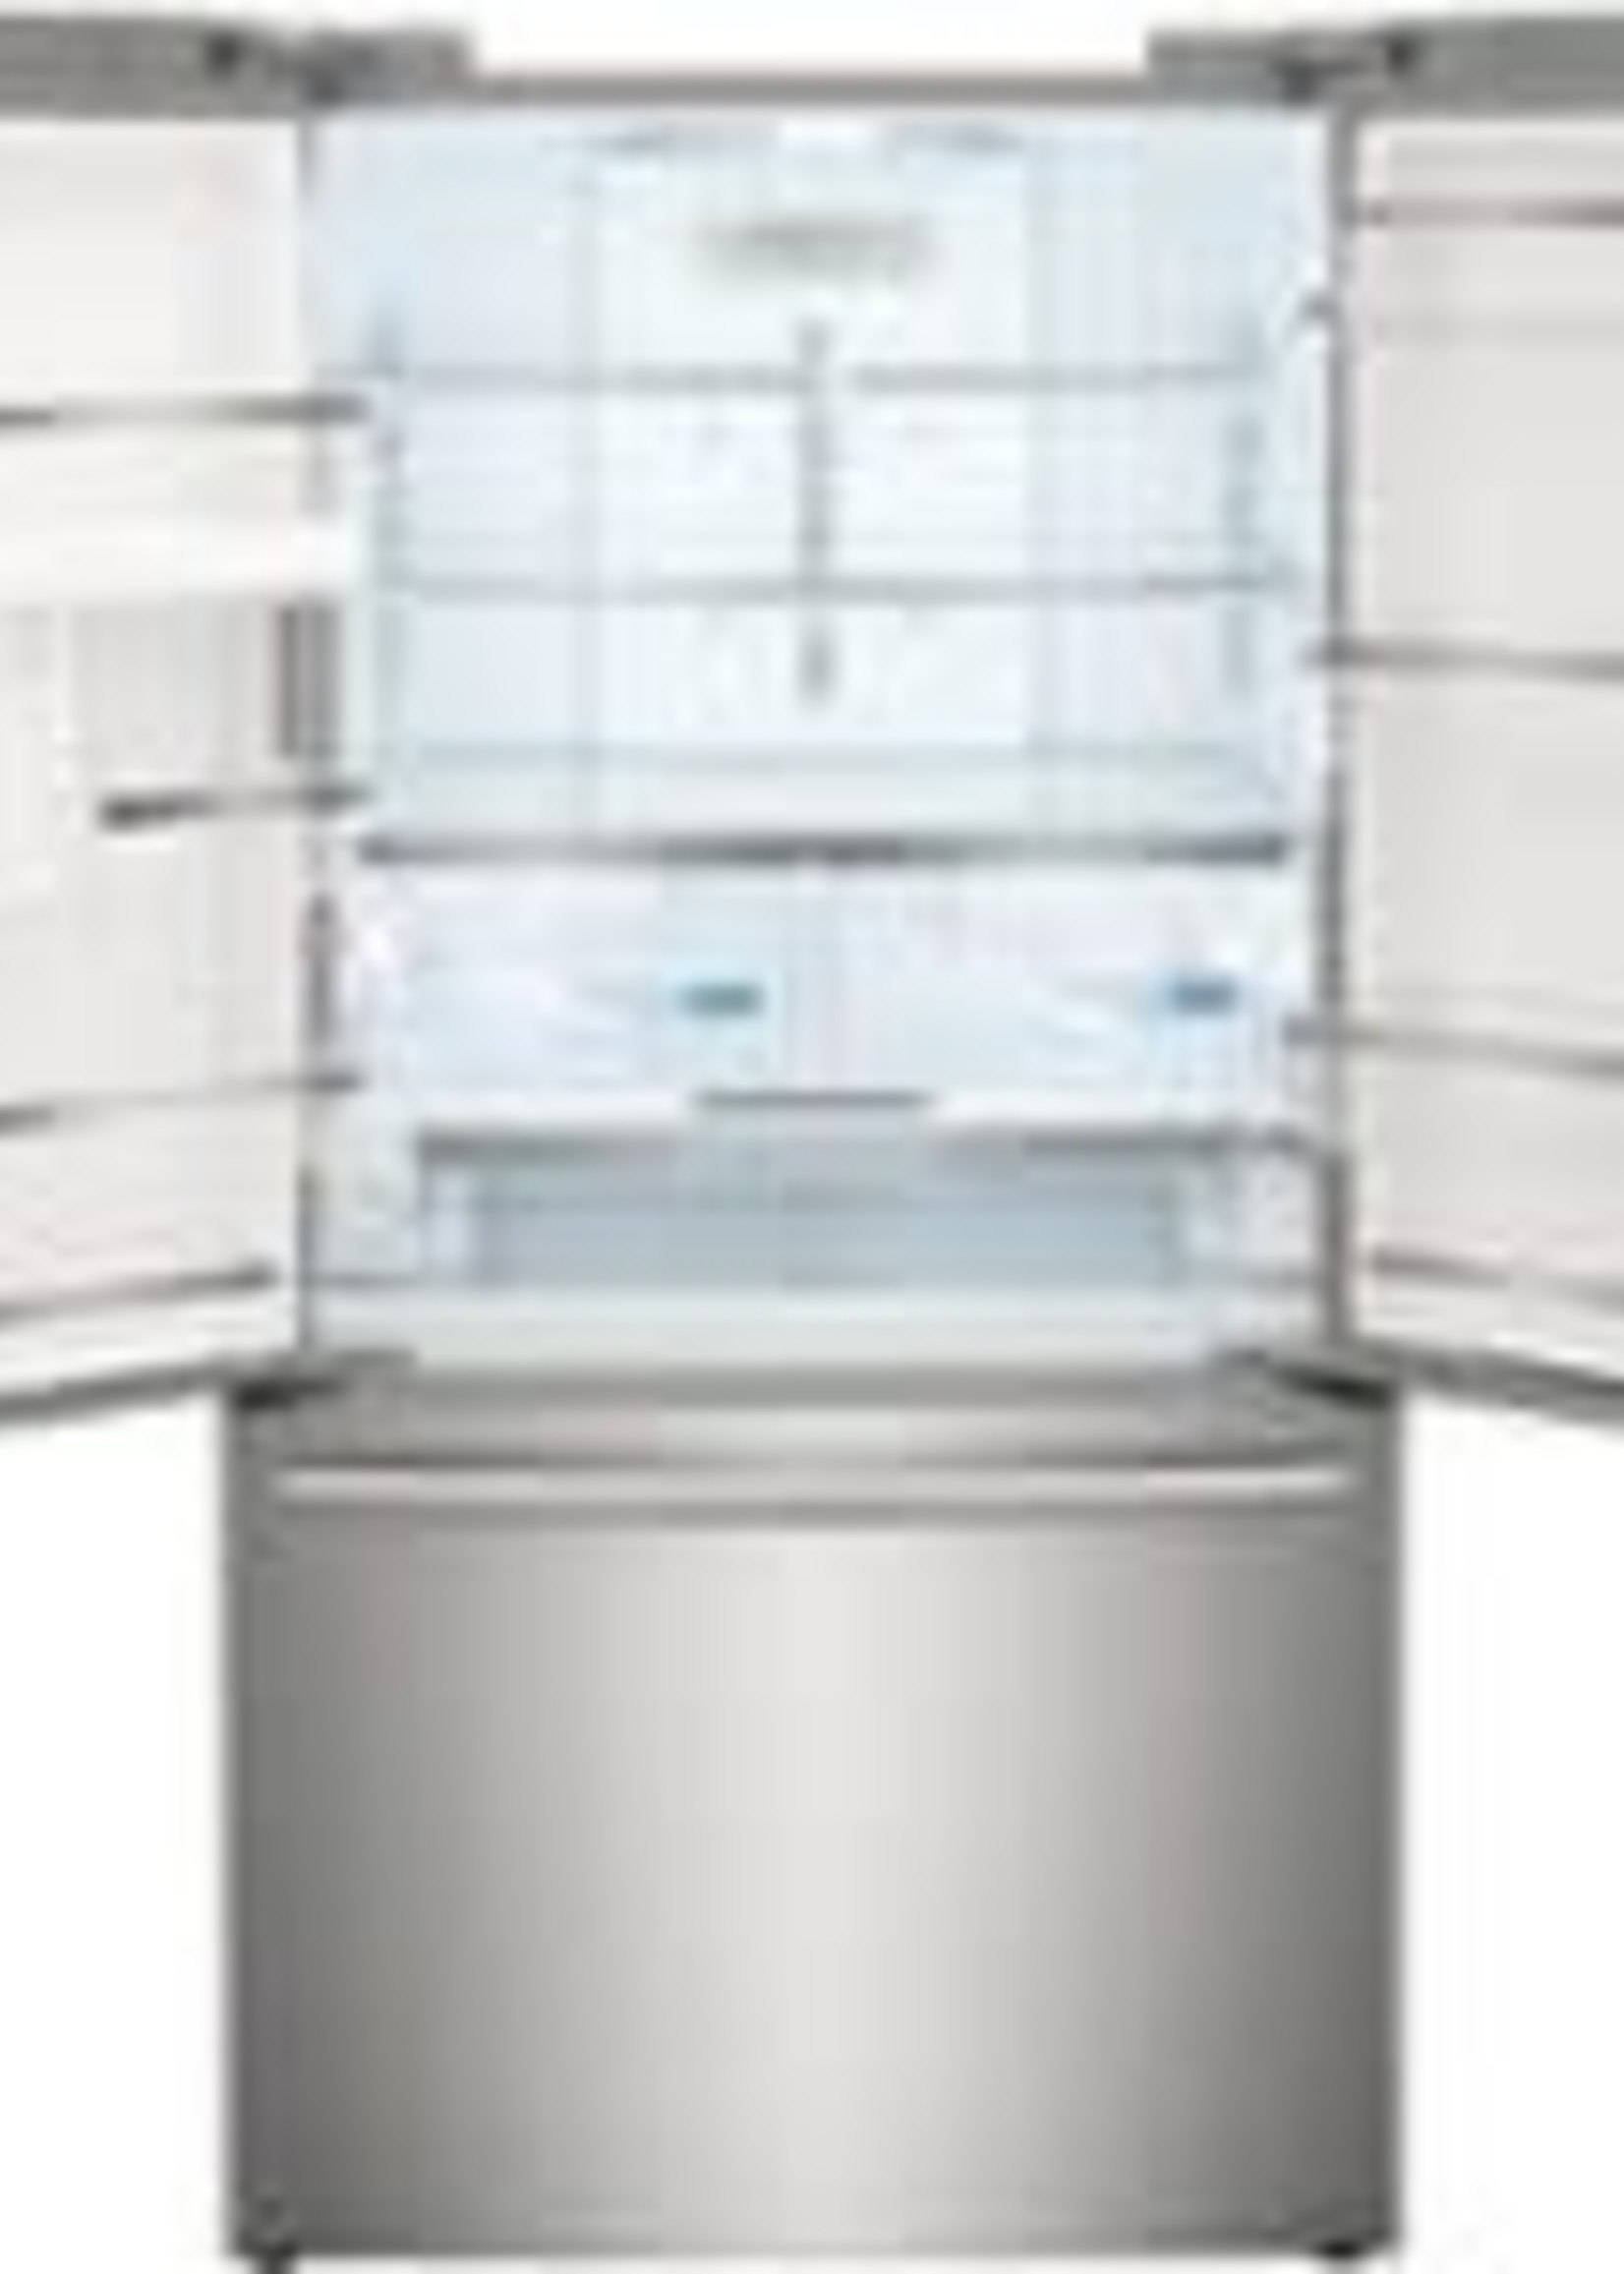 Frigidaire *Frigidaire GRFG2353AF 23.3-cu ft Counter-depth French Door Refrigerator with Ice Maker (Smudge-proof Stainless Steel) ENERGY STAR